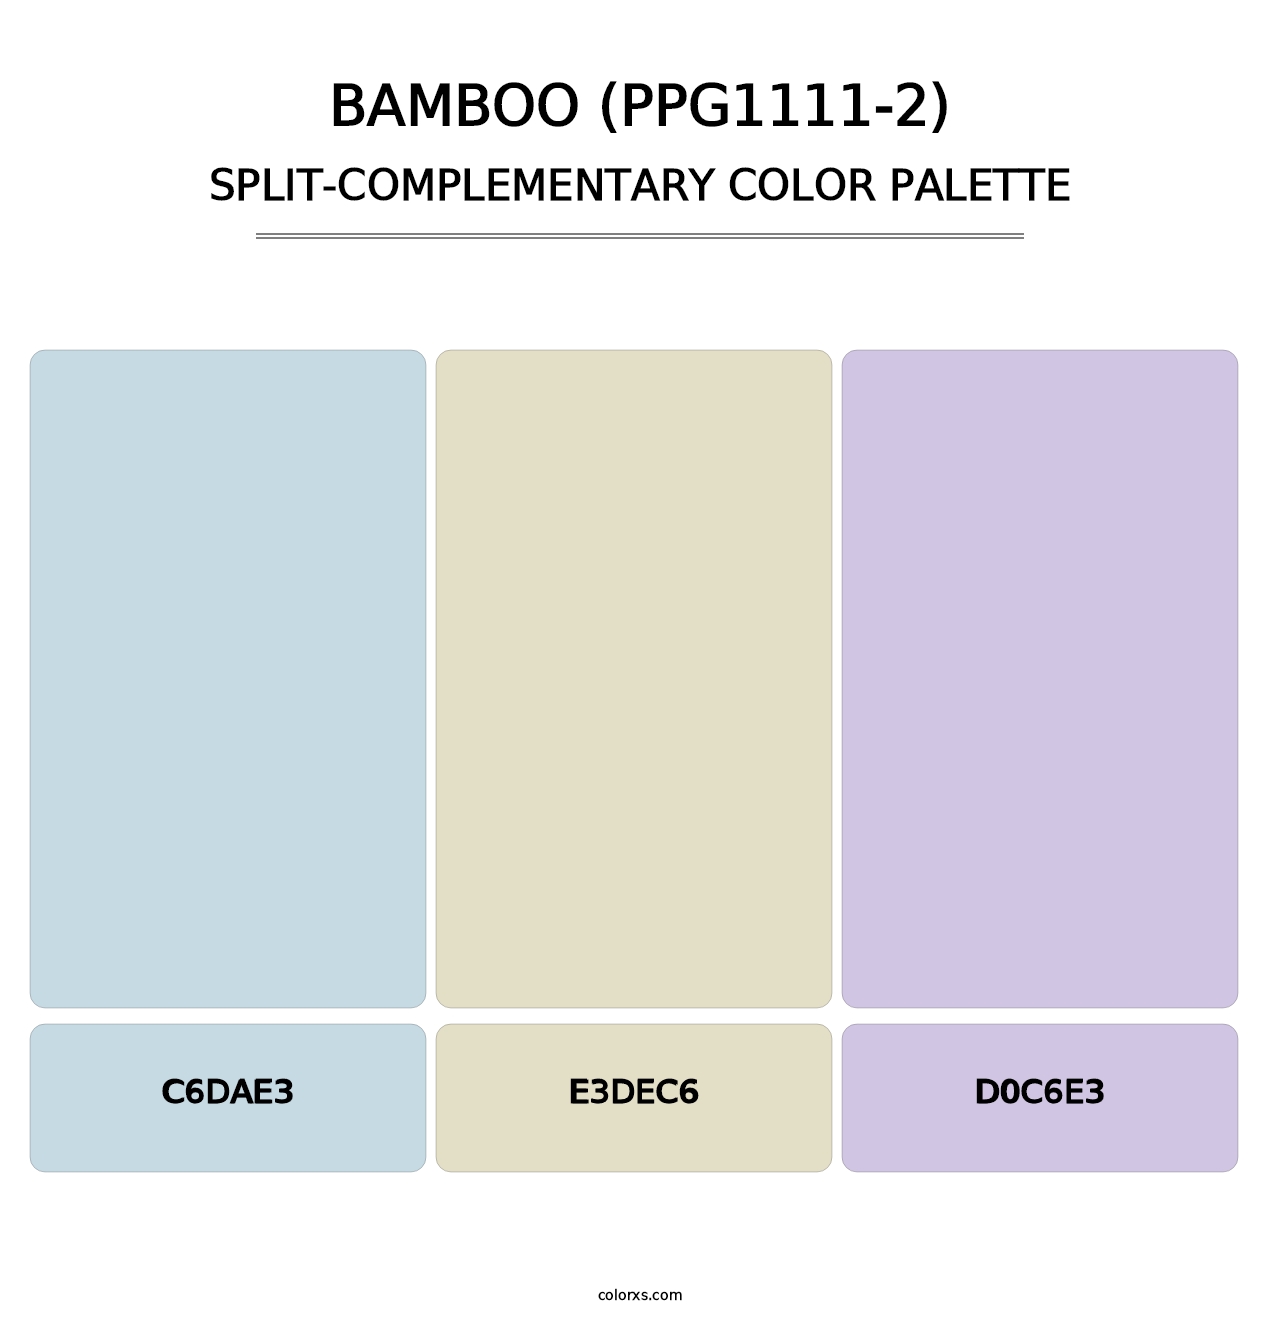 Bamboo (PPG1111-2) - Split-Complementary Color Palette